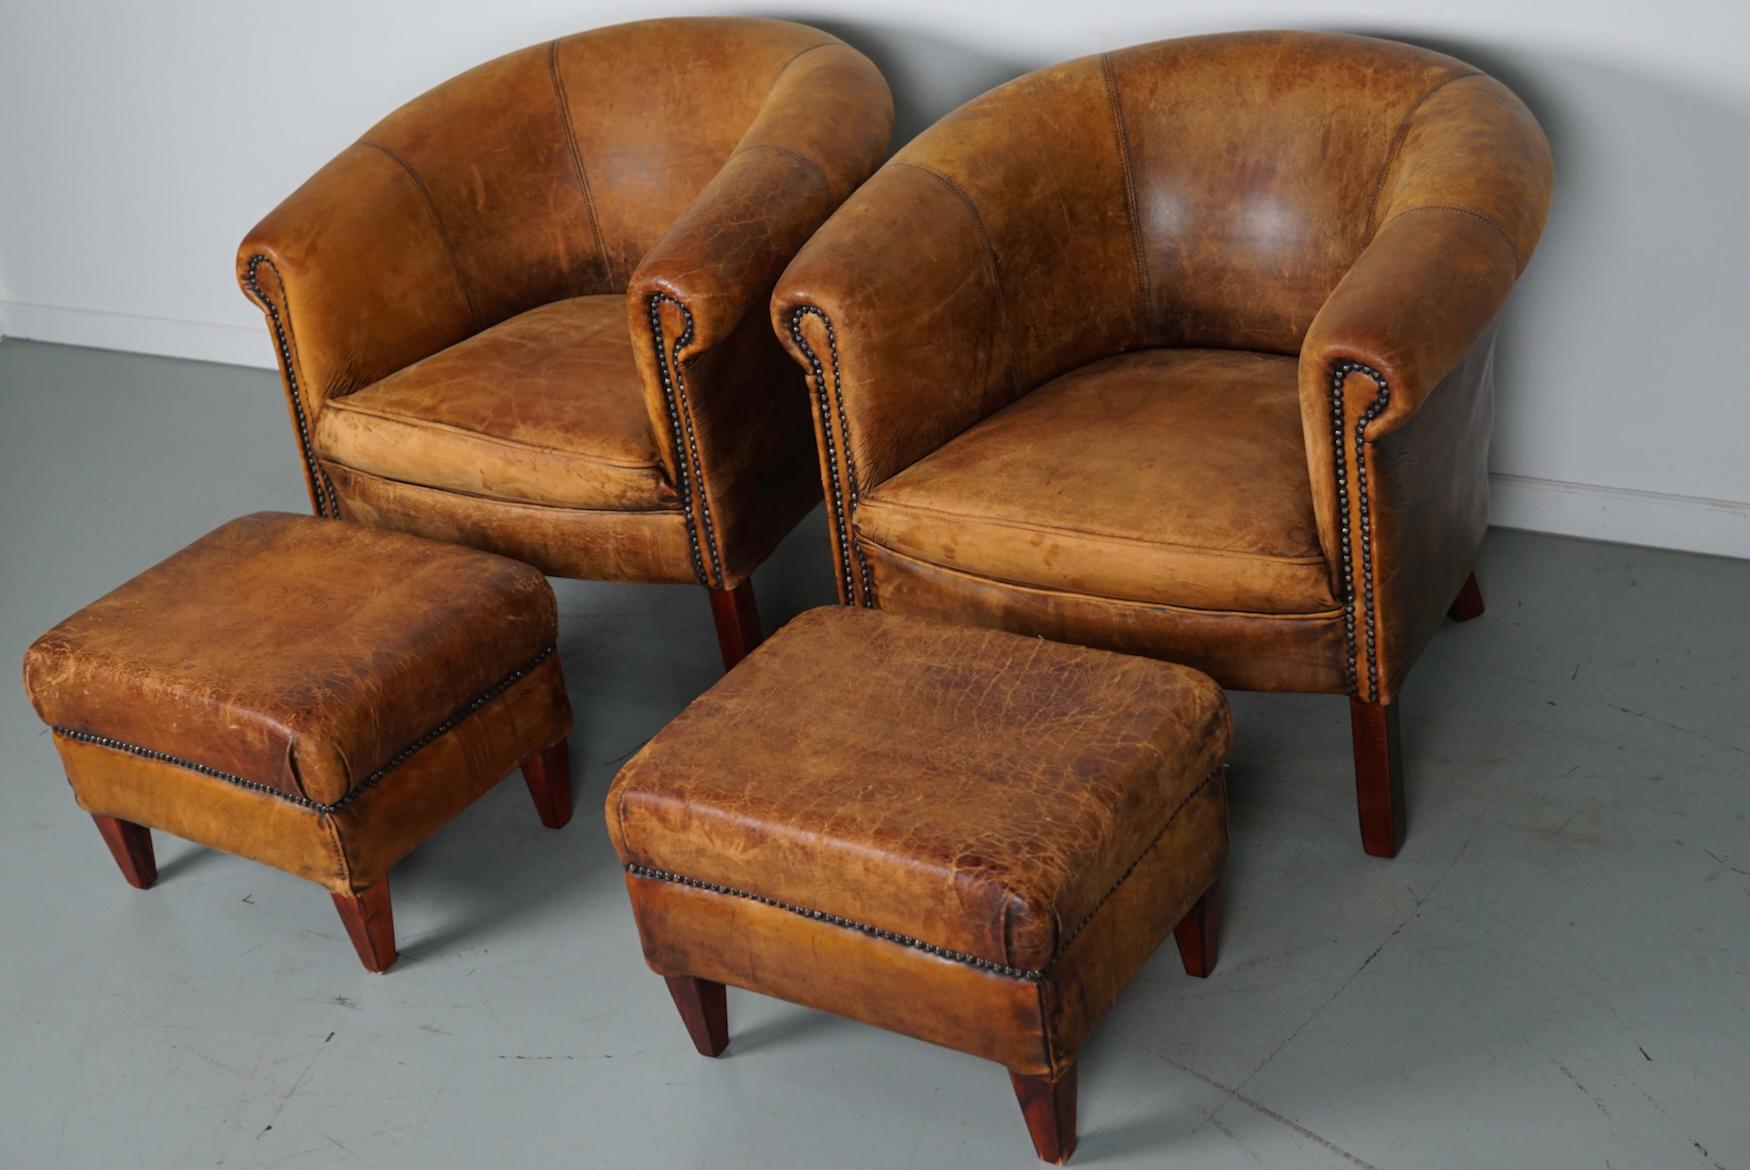 Vintage Dutch Cognac Colored Leather Club Chair, Set of 2 with Footstools For Sale 16